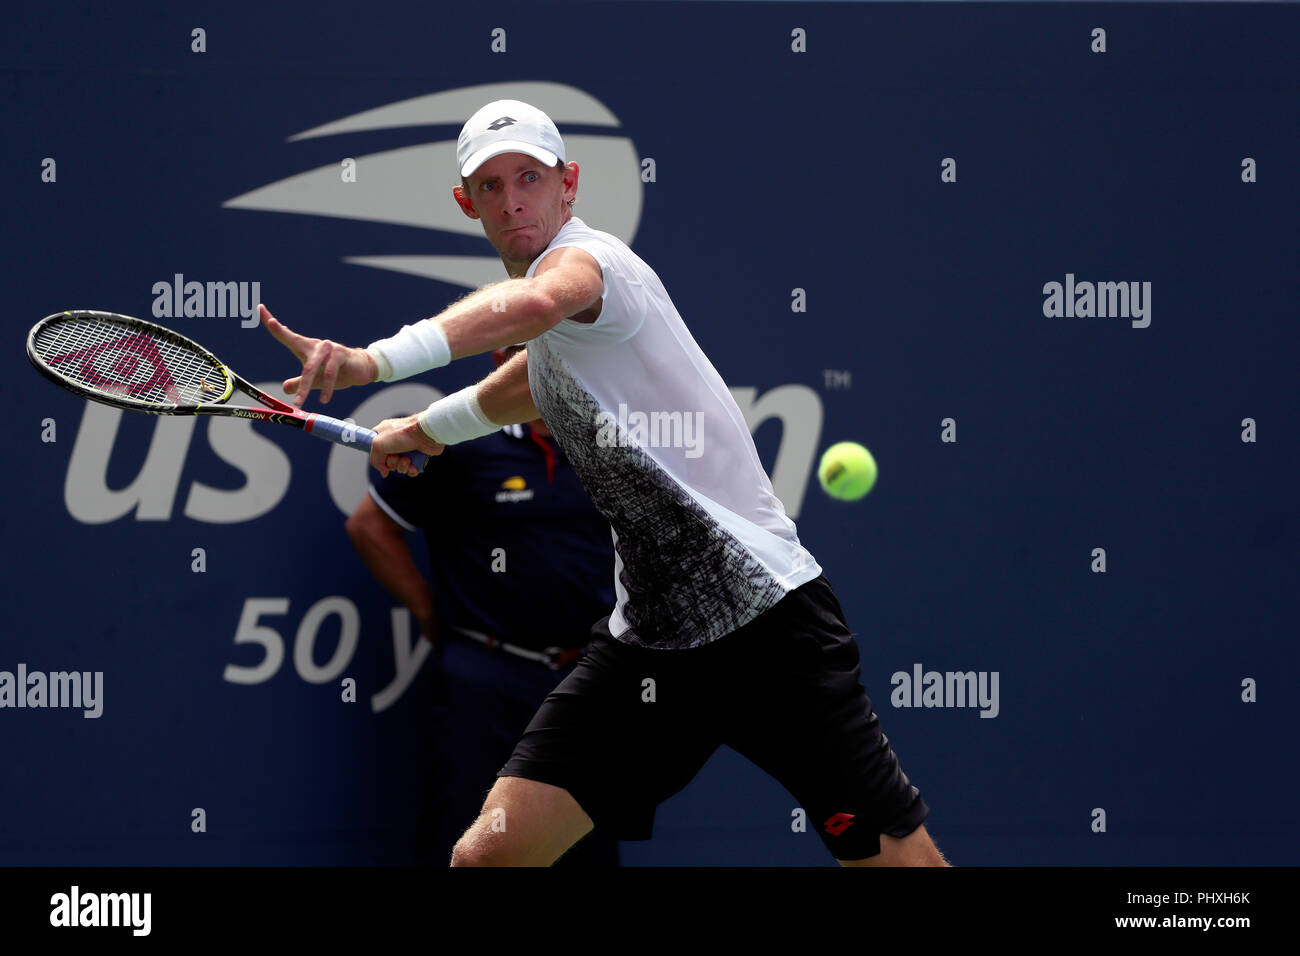 New York, United States. 02nd Sep, 2018. Flushing Meadows, New York - September 2, 2018: US Open Tennis: Kevin Anderson of South Africa in action against Number 9 seed, Dominic Thiem of Austria during their fourth round match at the US Open in Flushing Meadows, New York. Thiem won in straight sets. Credit: Adam Stoltman/Alamy Live News Stock Photo